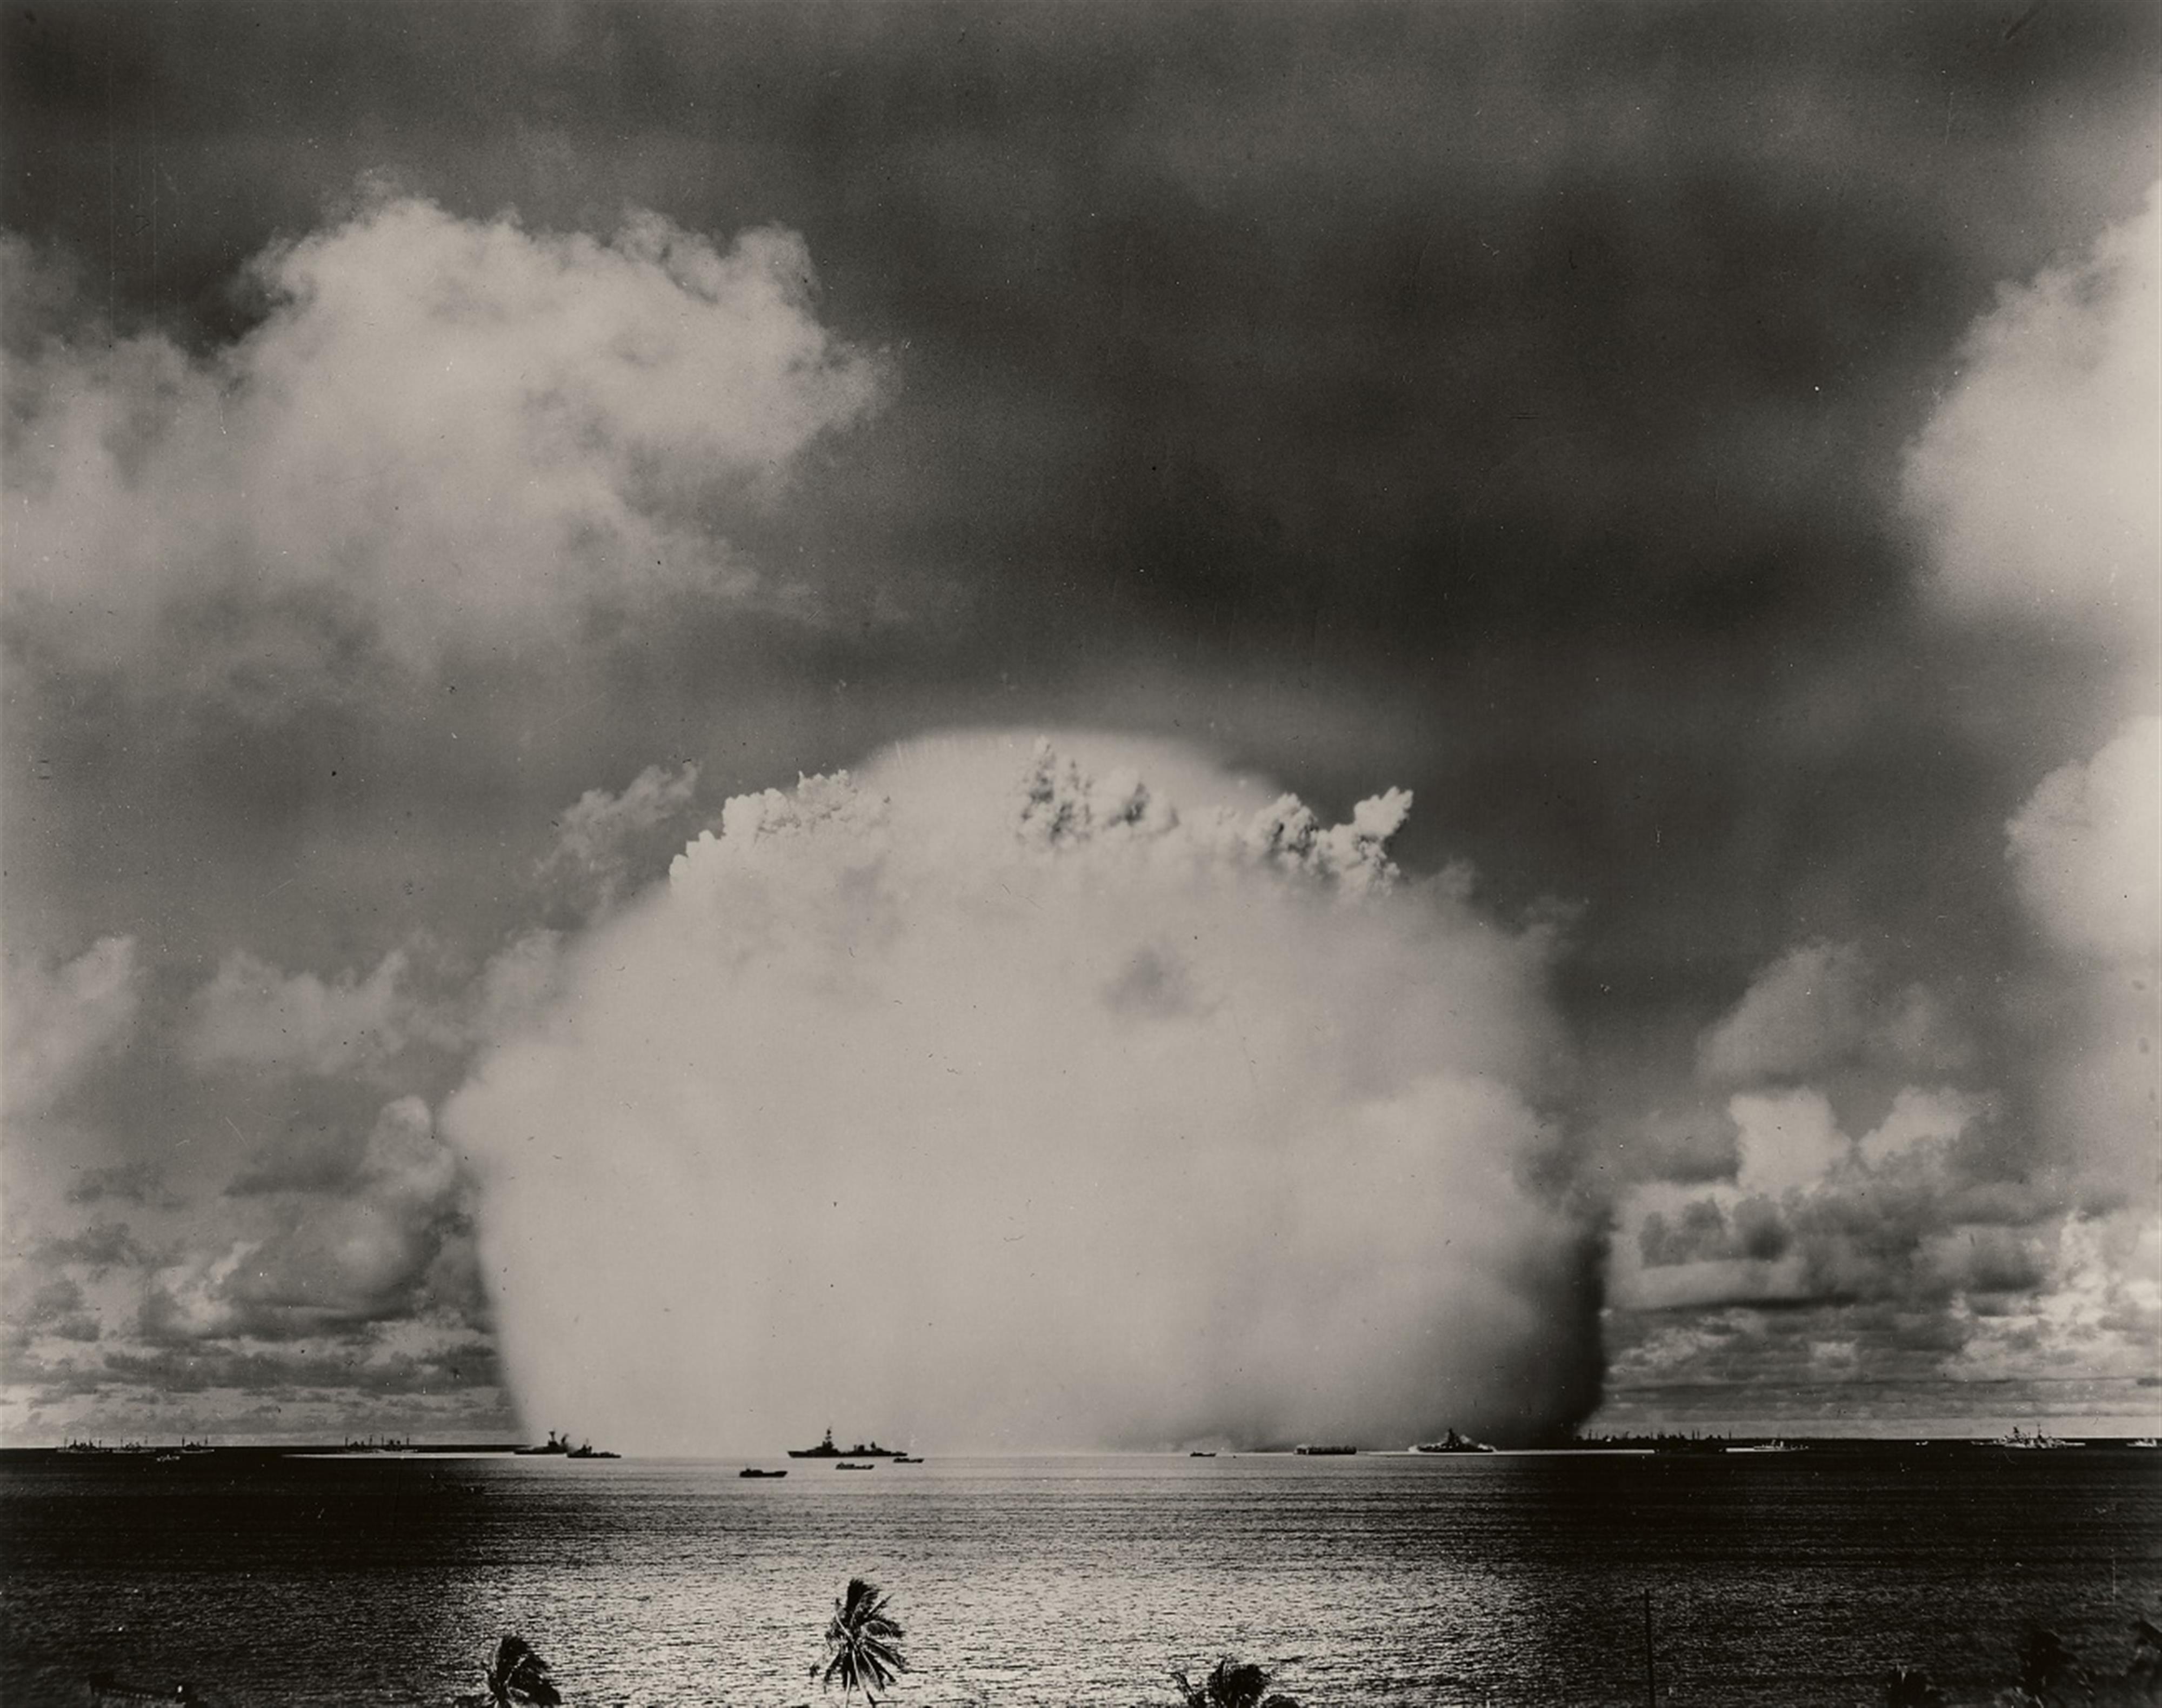 Joint Army Task Force One Photo - "Operation Crossroads" - Views of the Bikini Atoll nuclear Tests - image-2